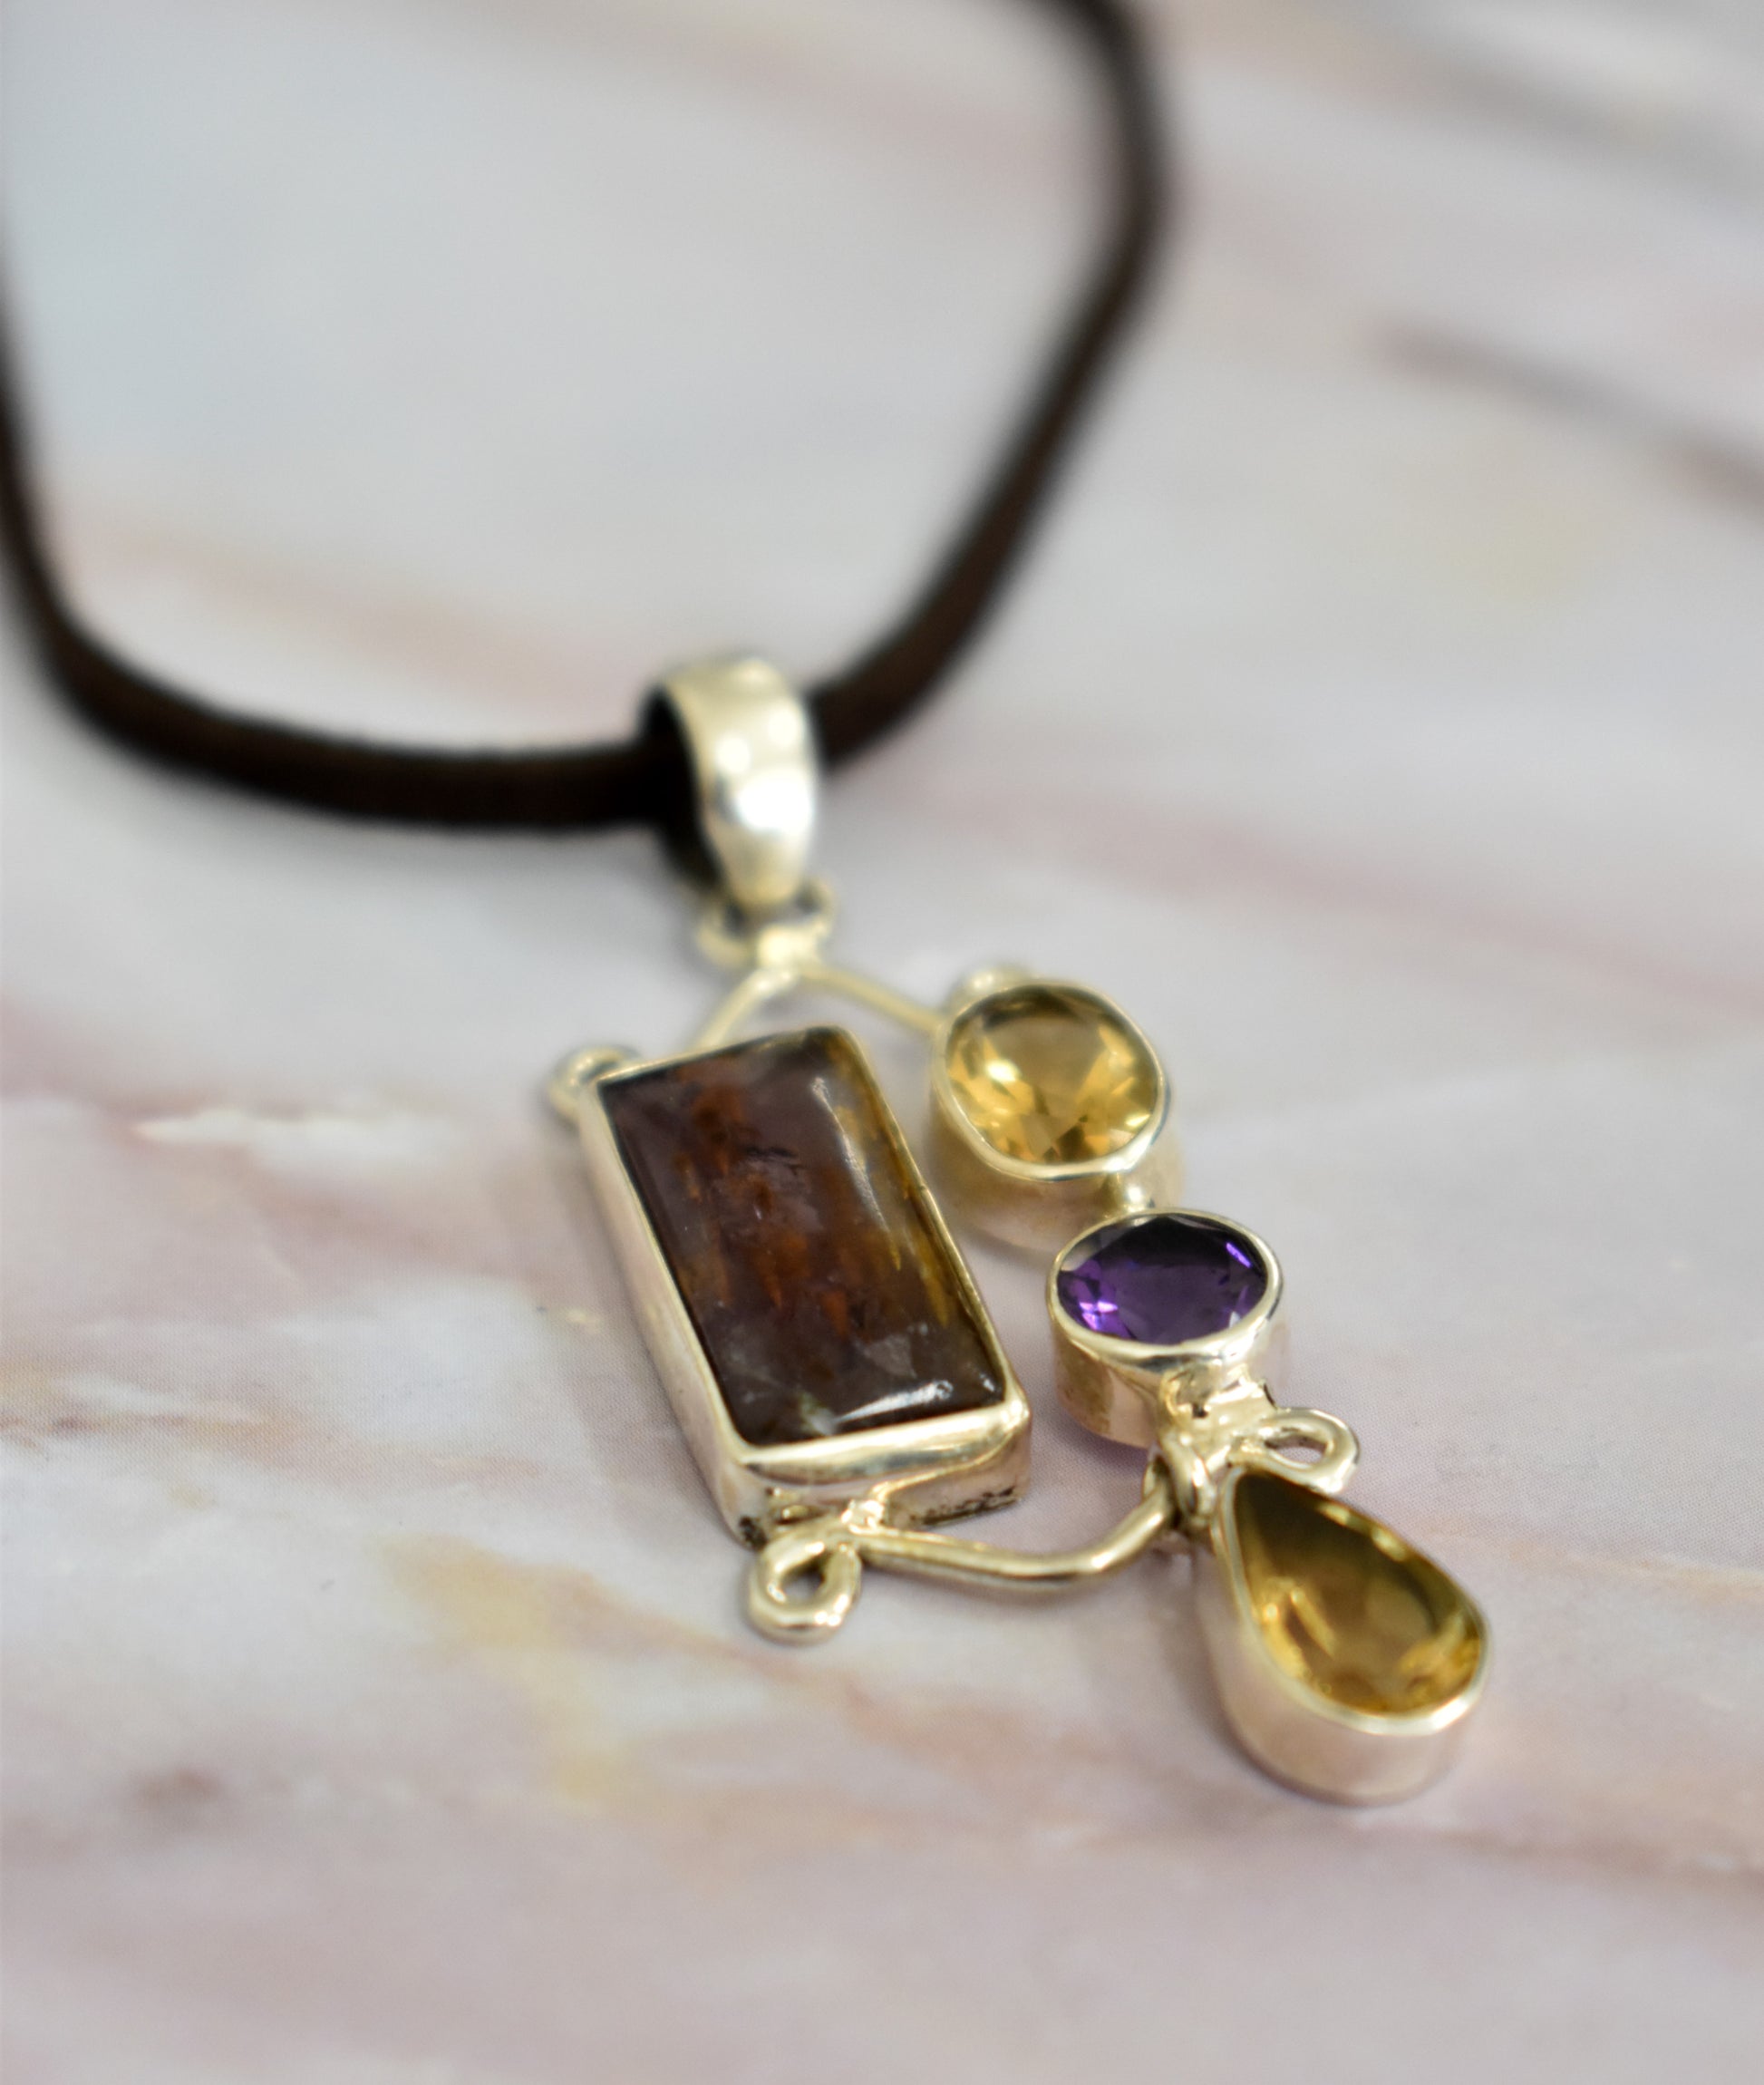 stones-of-transformation - Citrine, Amethyst and Super 7 (Melody's Stone) Necklace - Stones of Transformation - 